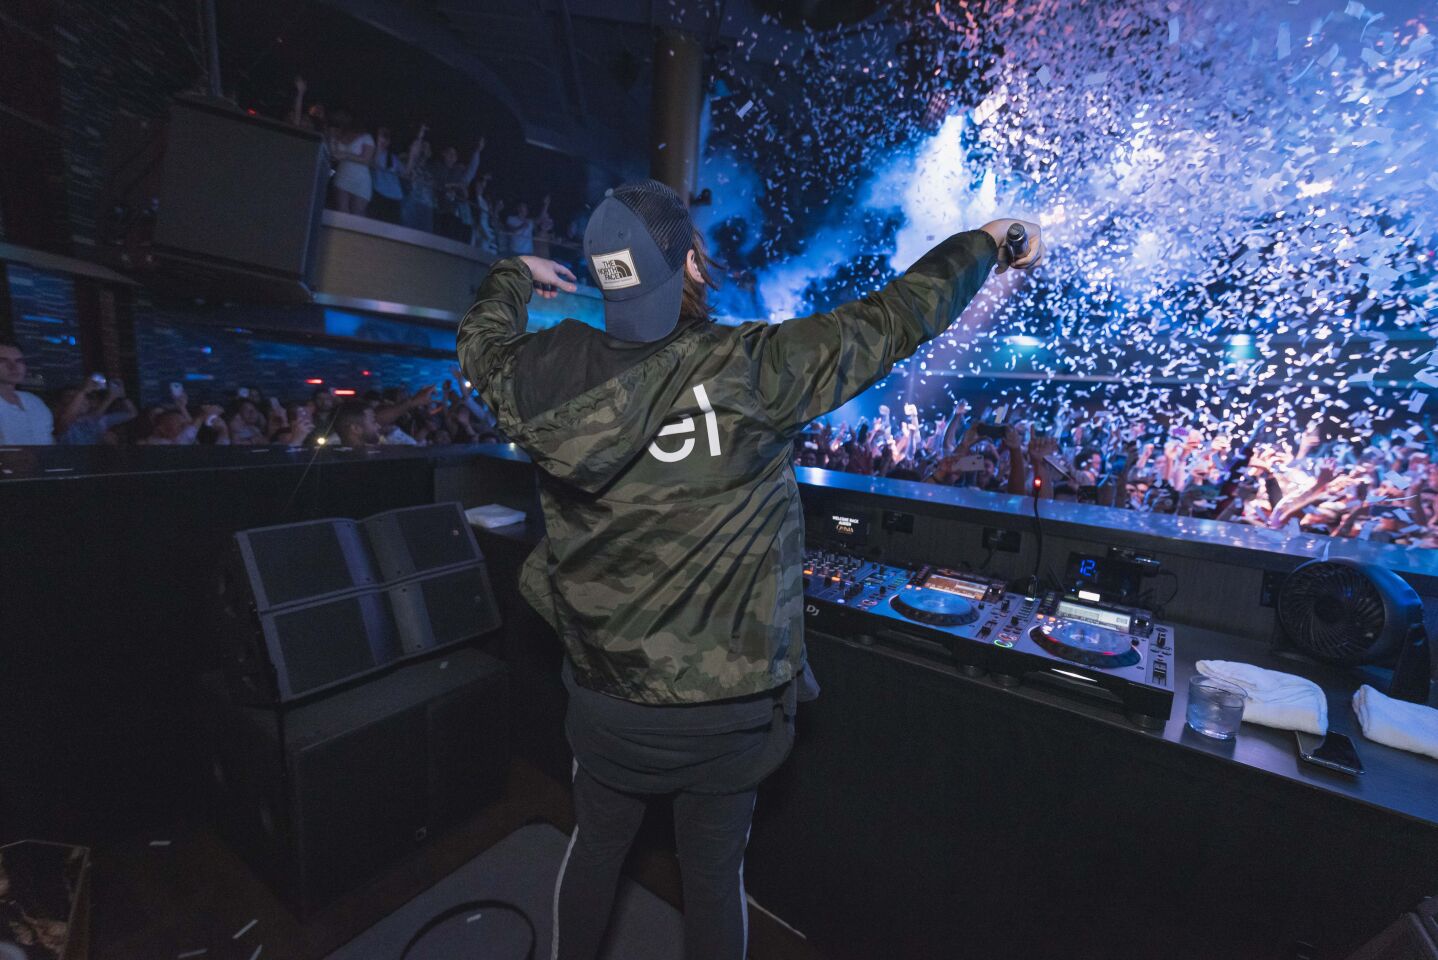 The crowd went wild when Audien hit the stage at OMNIA San Diego on Friday, May 3, 2019.